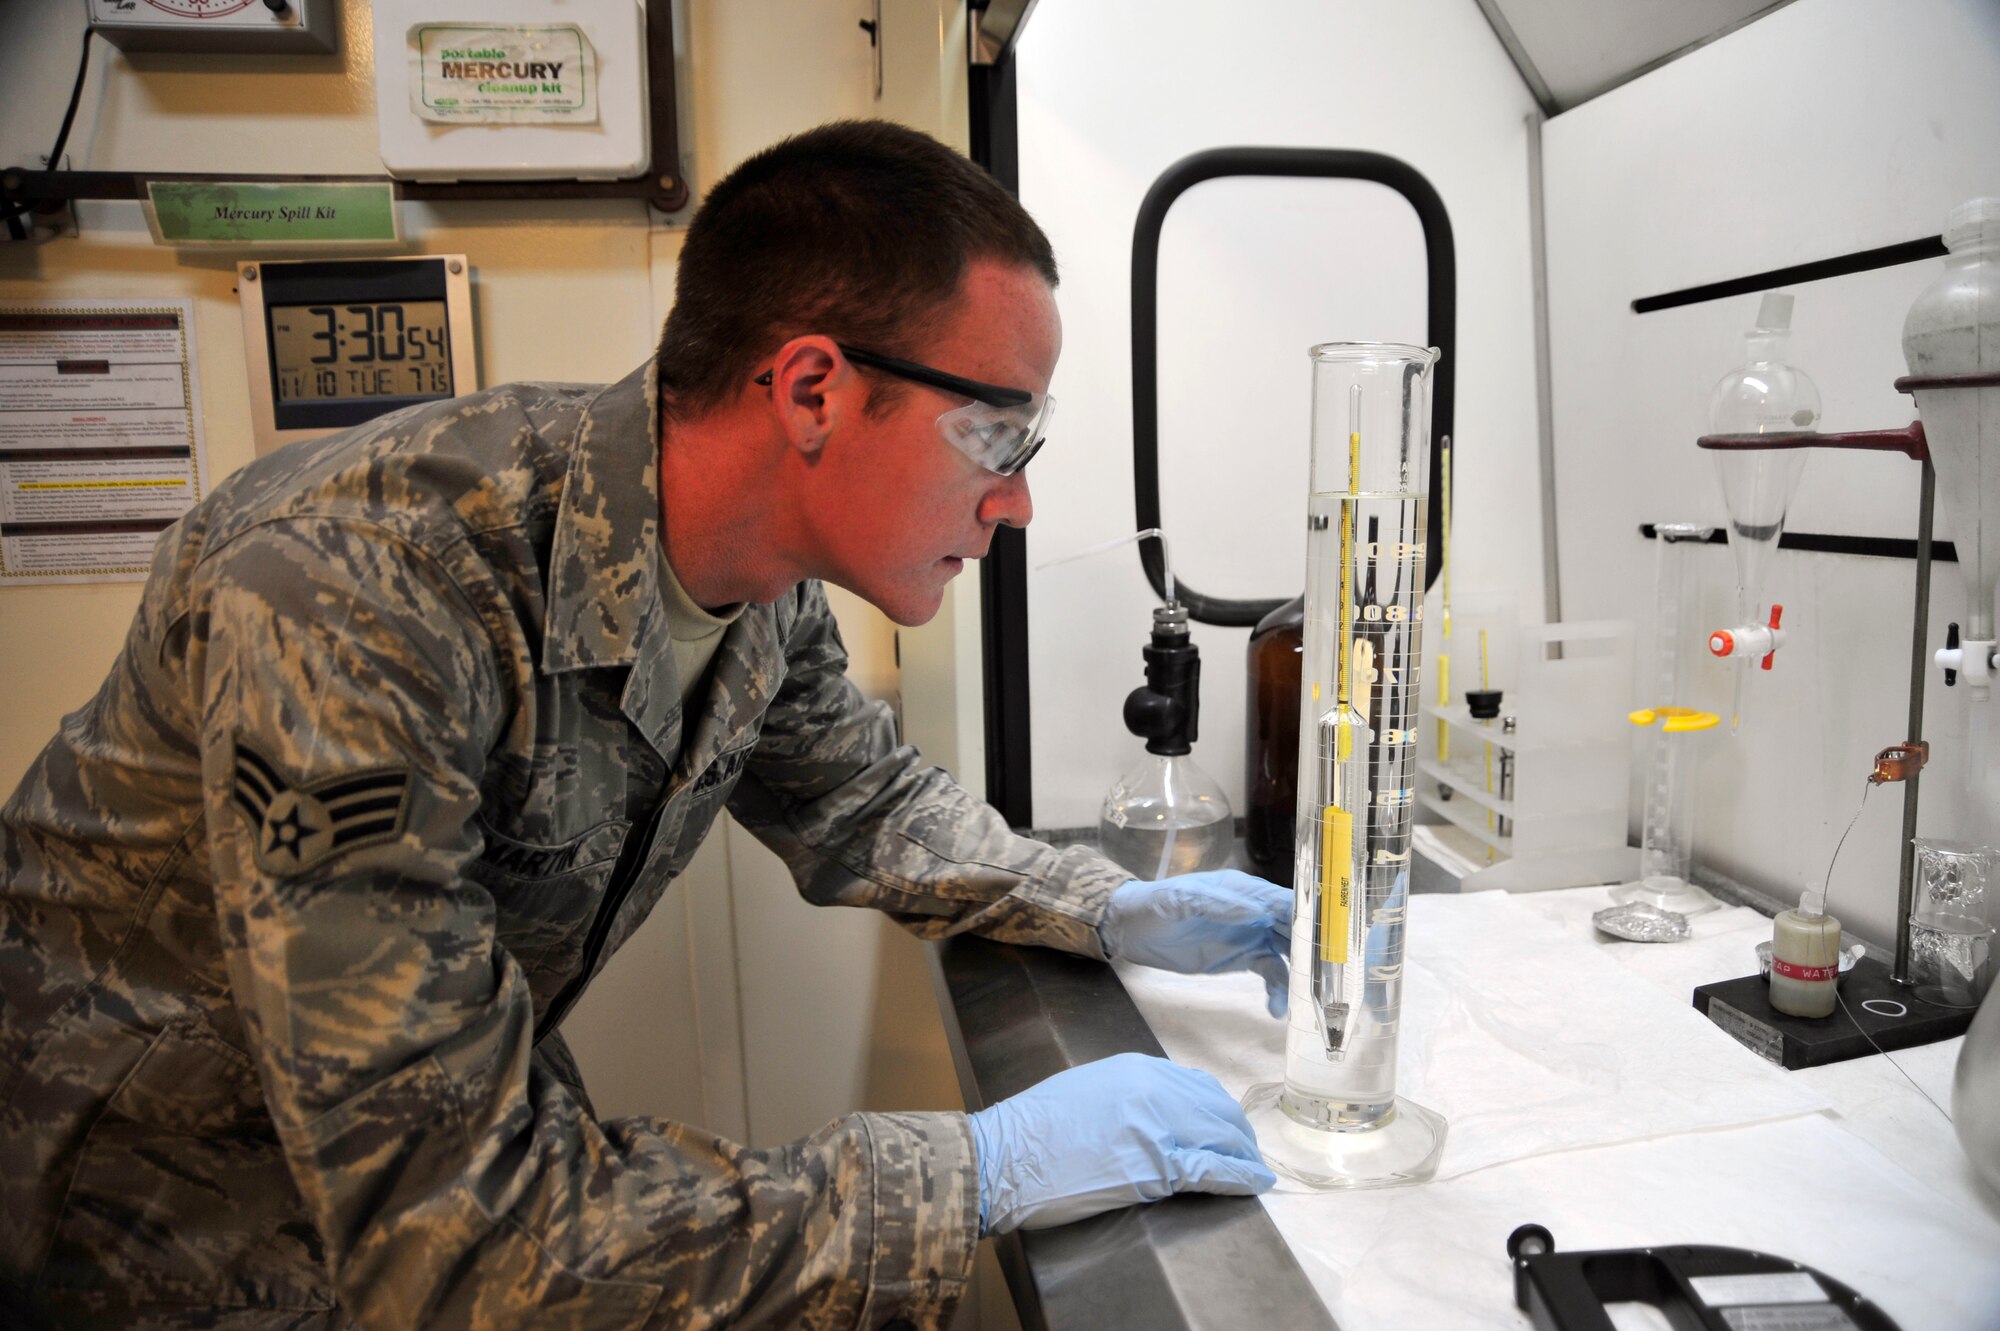 SOUTHWEST ASIA - Senior Airman Levi Martin, 380th Expeditionary Logistics Readiness Squadron fuel laboratory technician, reads the measurement on a hydrometer in a beaker of jet fuel Nov. 10, 2009. Airman Martin is deployed from Dover Air Force Base, Del., and grew up in Crestview, Fla. (U.S. Air Force photo/Tech. Sgt. Charles Larkin Sr)